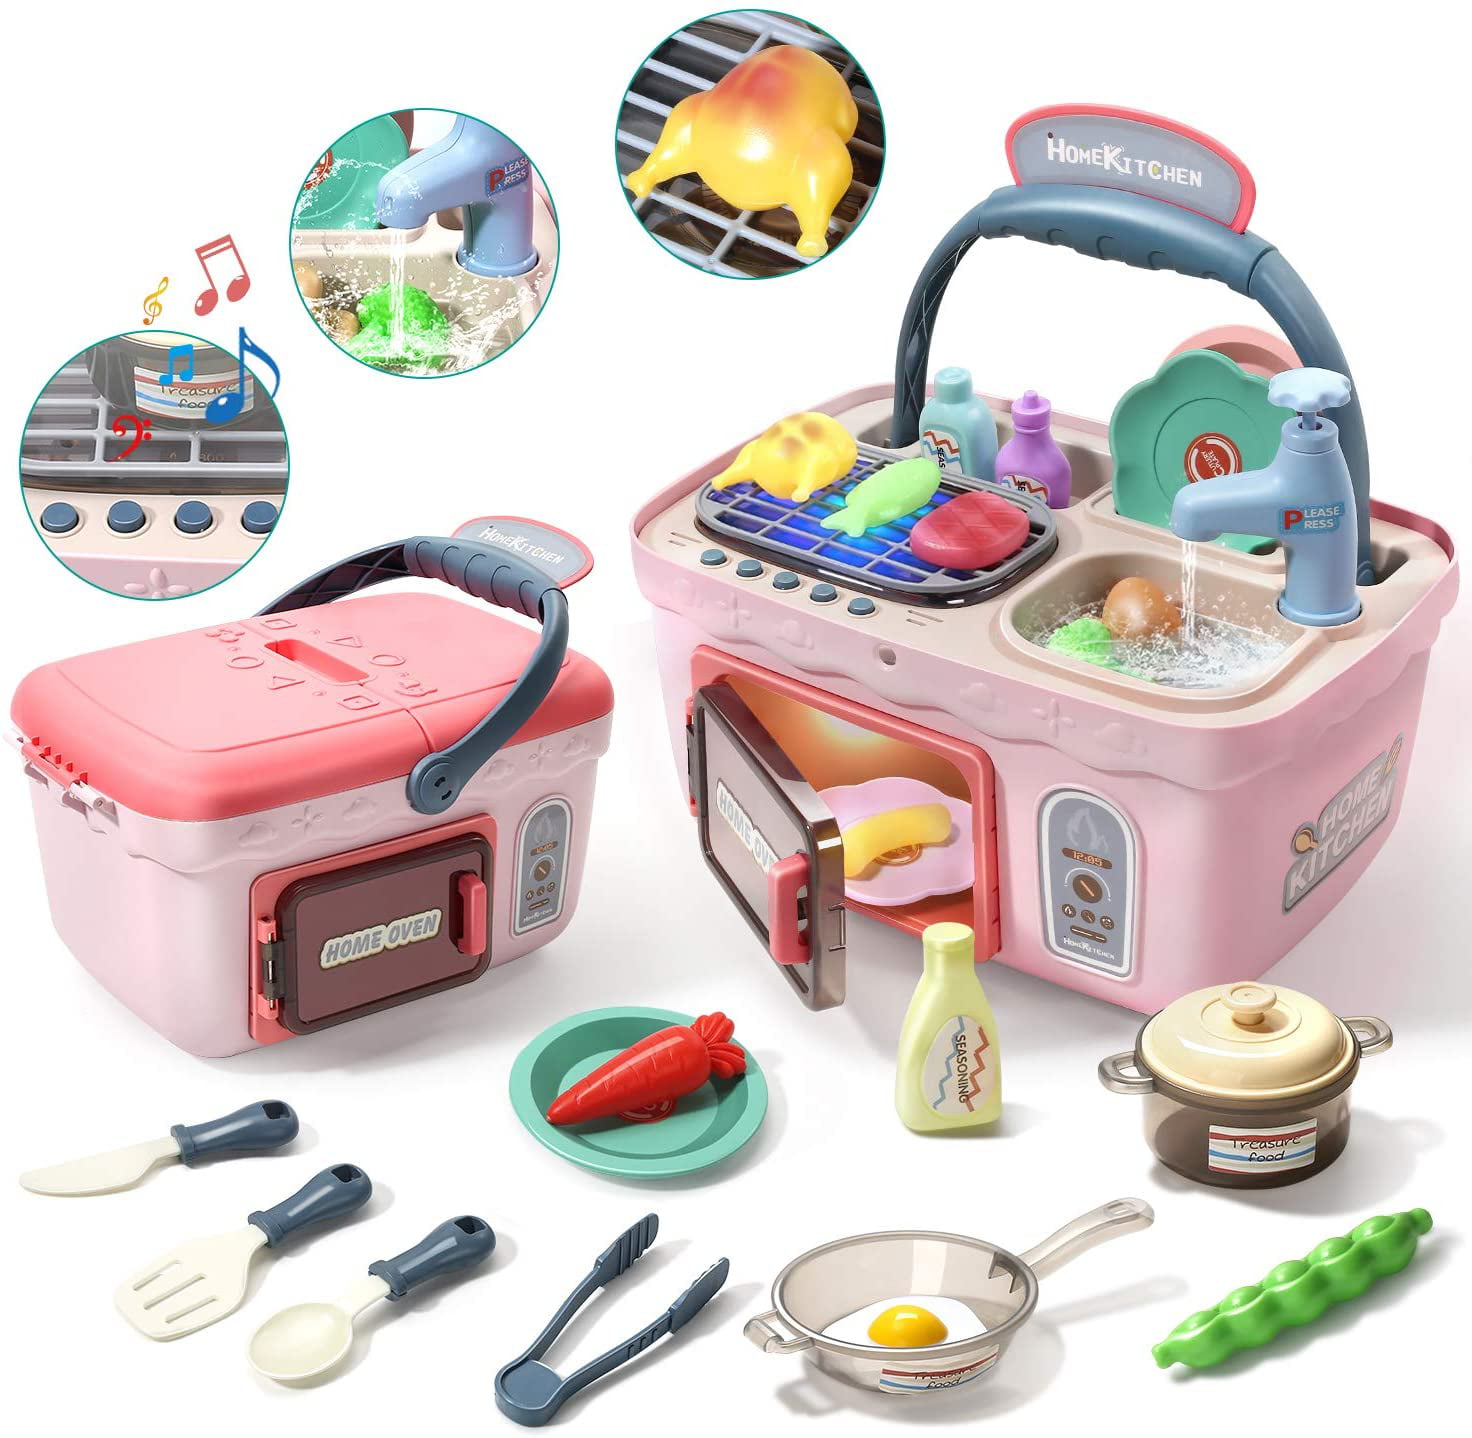 Kids Picnic Kitchen Playset Basket Toys with Music Lights Pretend Play Oven Gift 